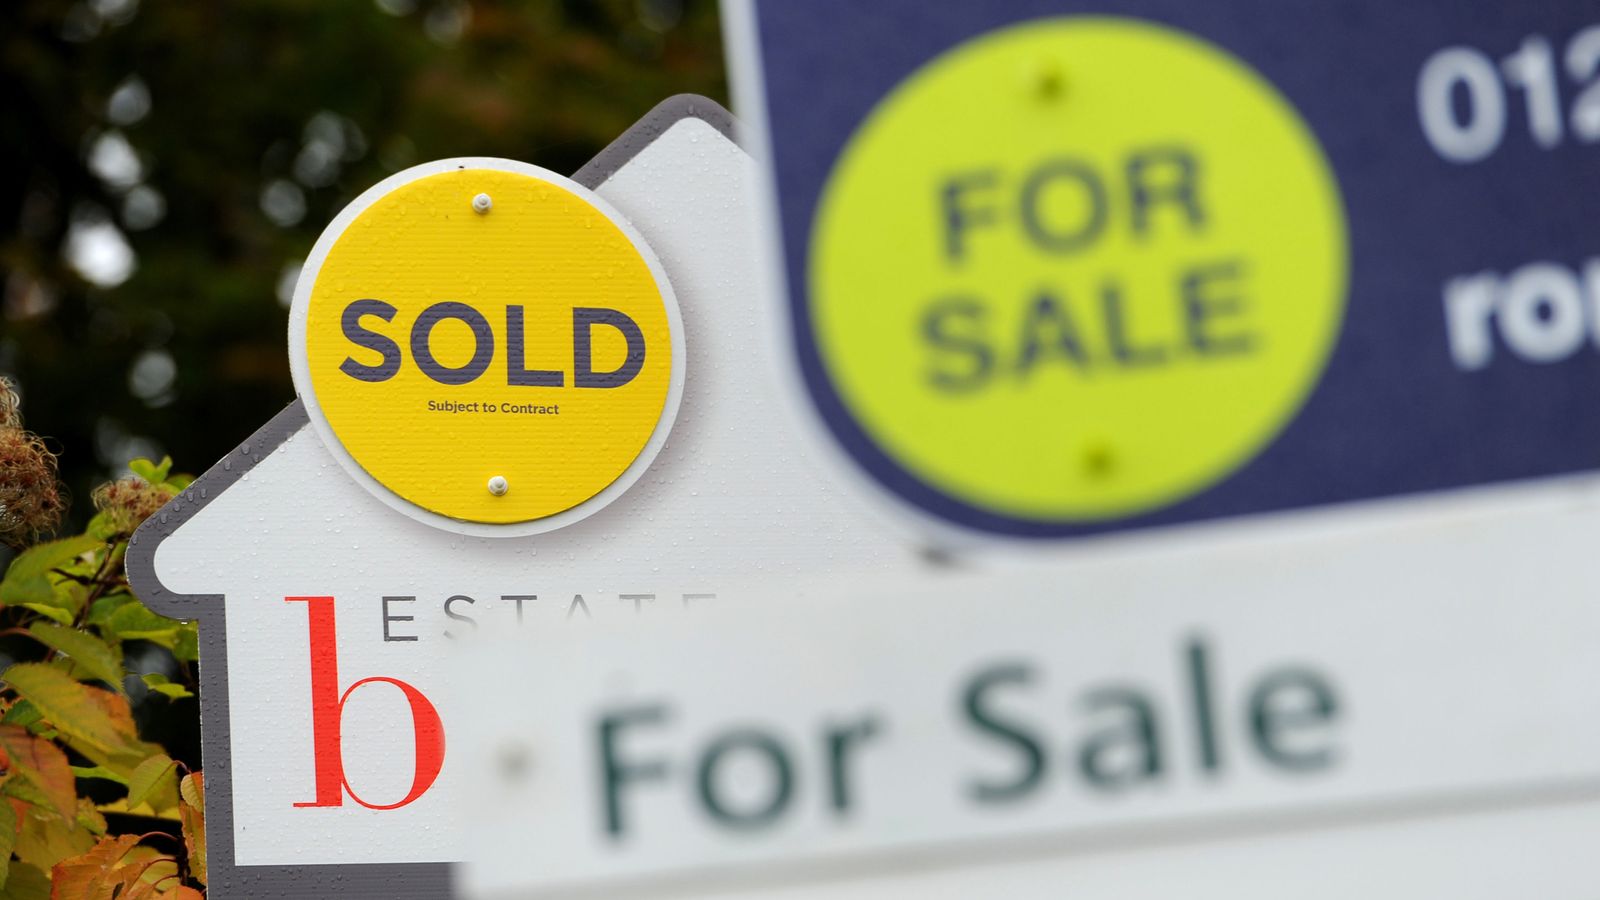 House prices rise at biggest monthly rate since 2004 after stamp duty holiday extension